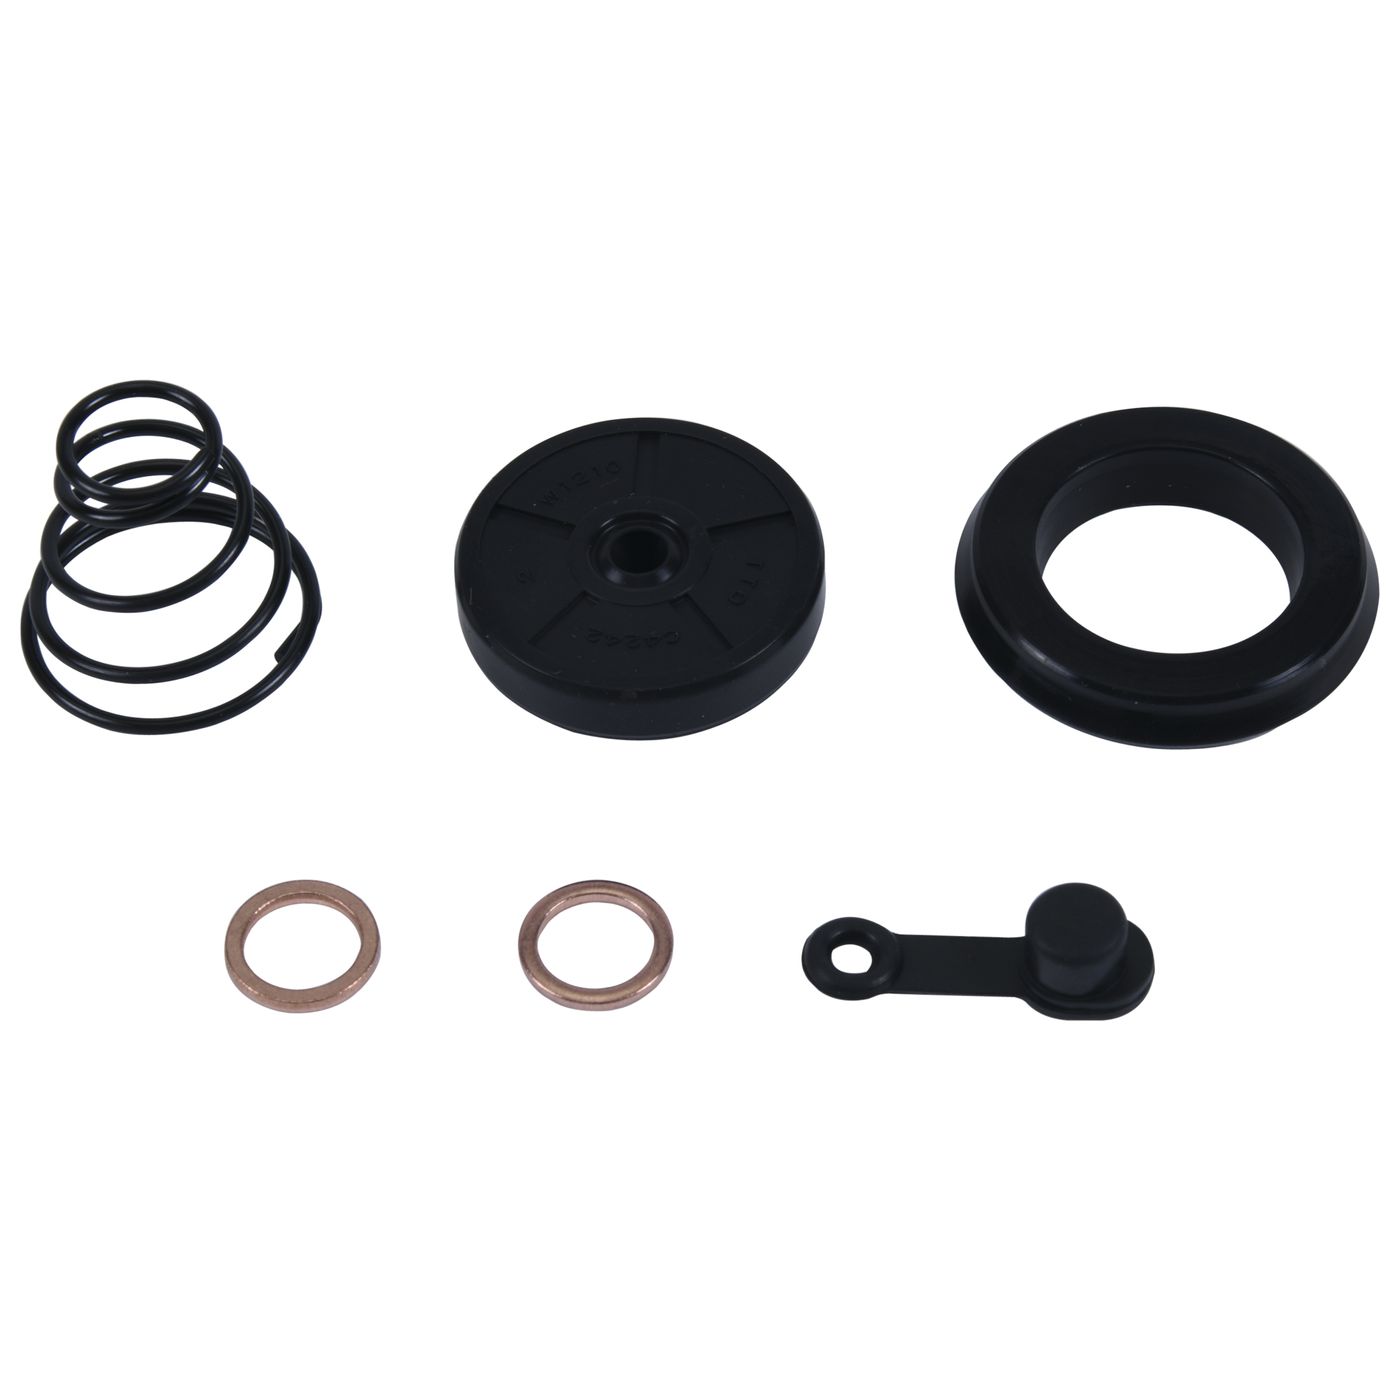 Wrp Clutch Slave Cylinder Kits - WRP186017 image